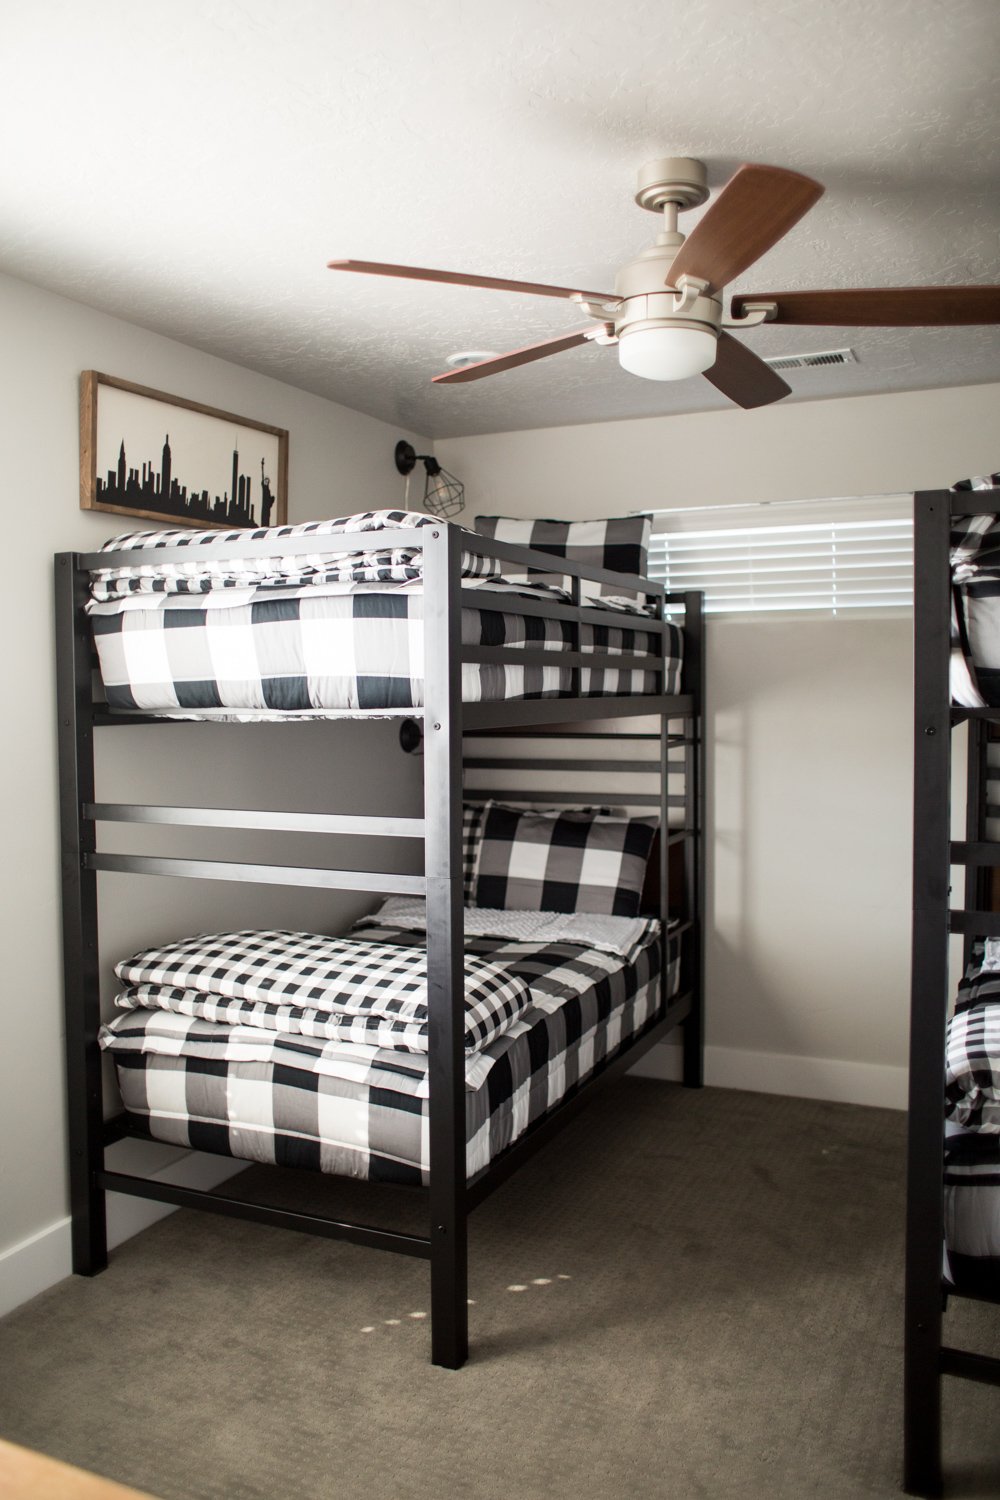 How To Make A Bunkbed In Less Than 5, Bunk Bed Fan Ideas